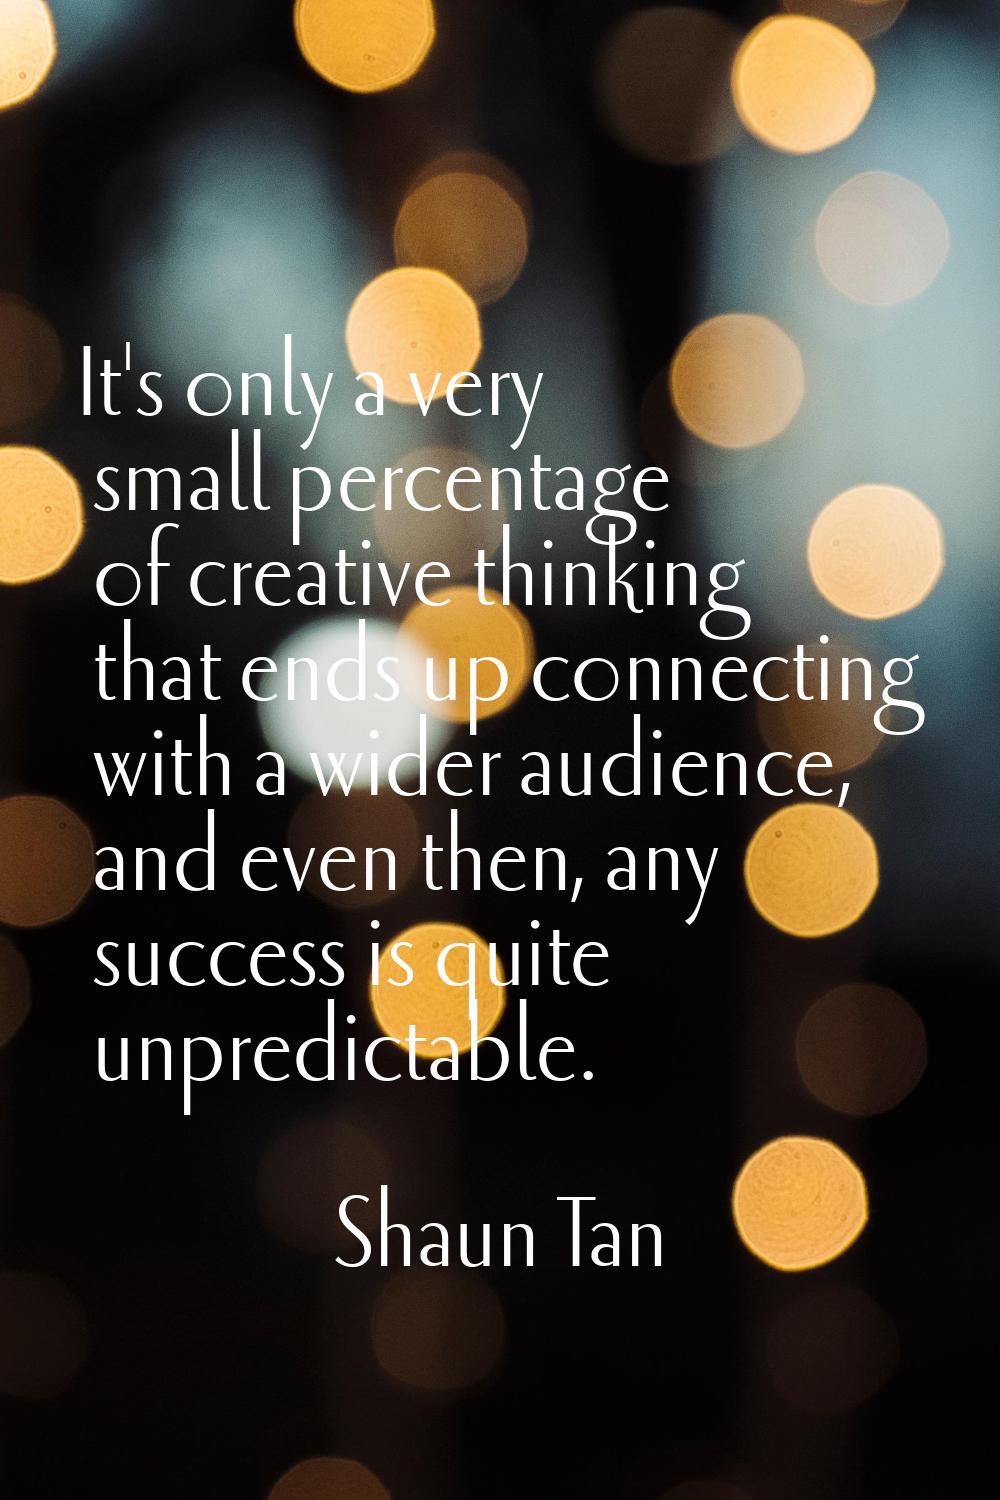 It's only a very small percentage of creative thinking that ends up connecting with a wider audienc